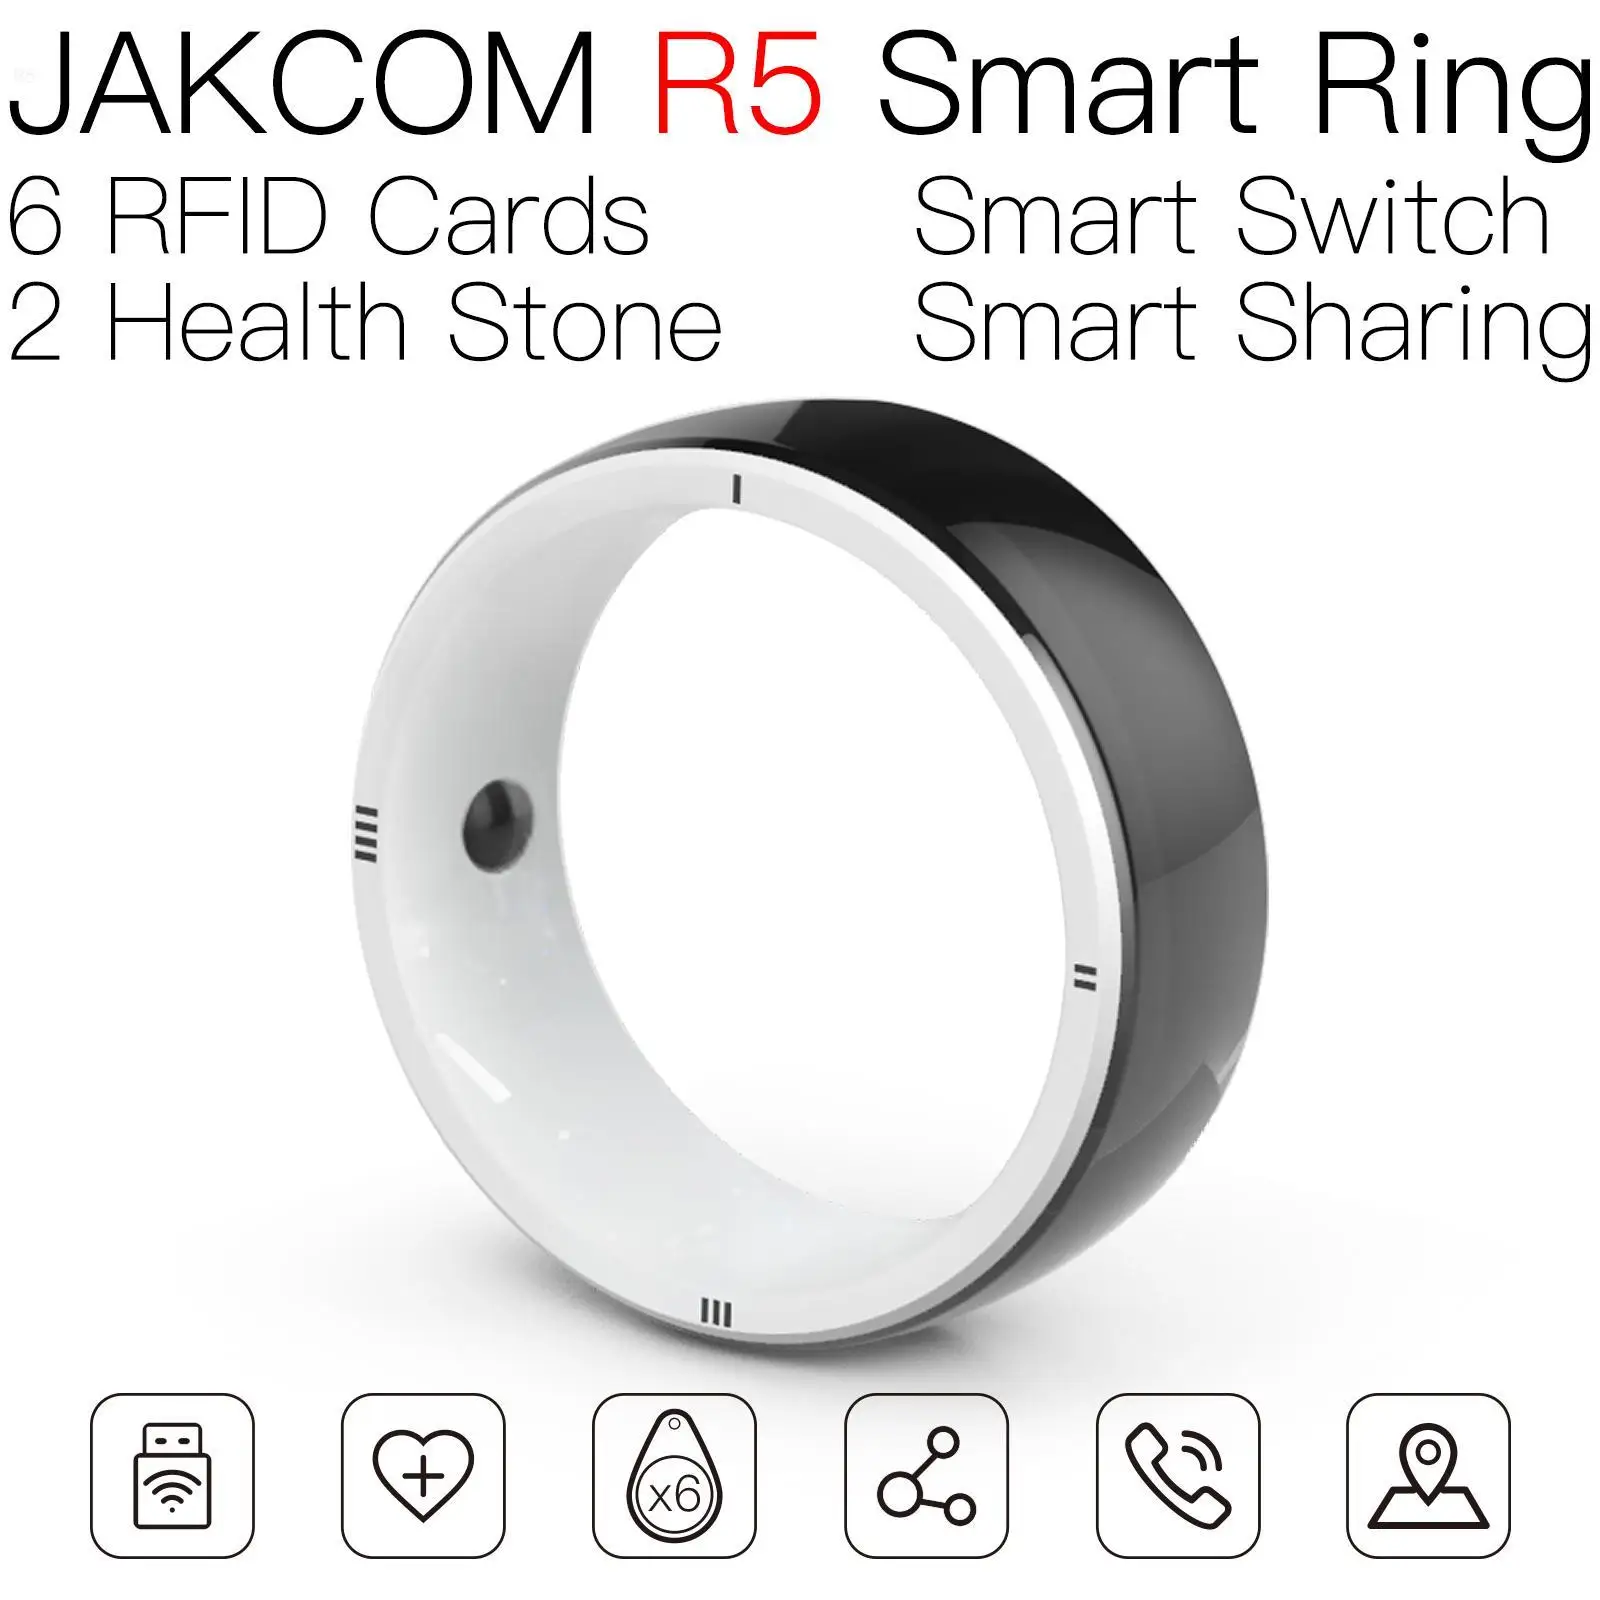 

JAKCOM R5 Smart Ring Super value than nfc tag rfid metal 5 mm audie gigatms mf7 token tags writable card cat